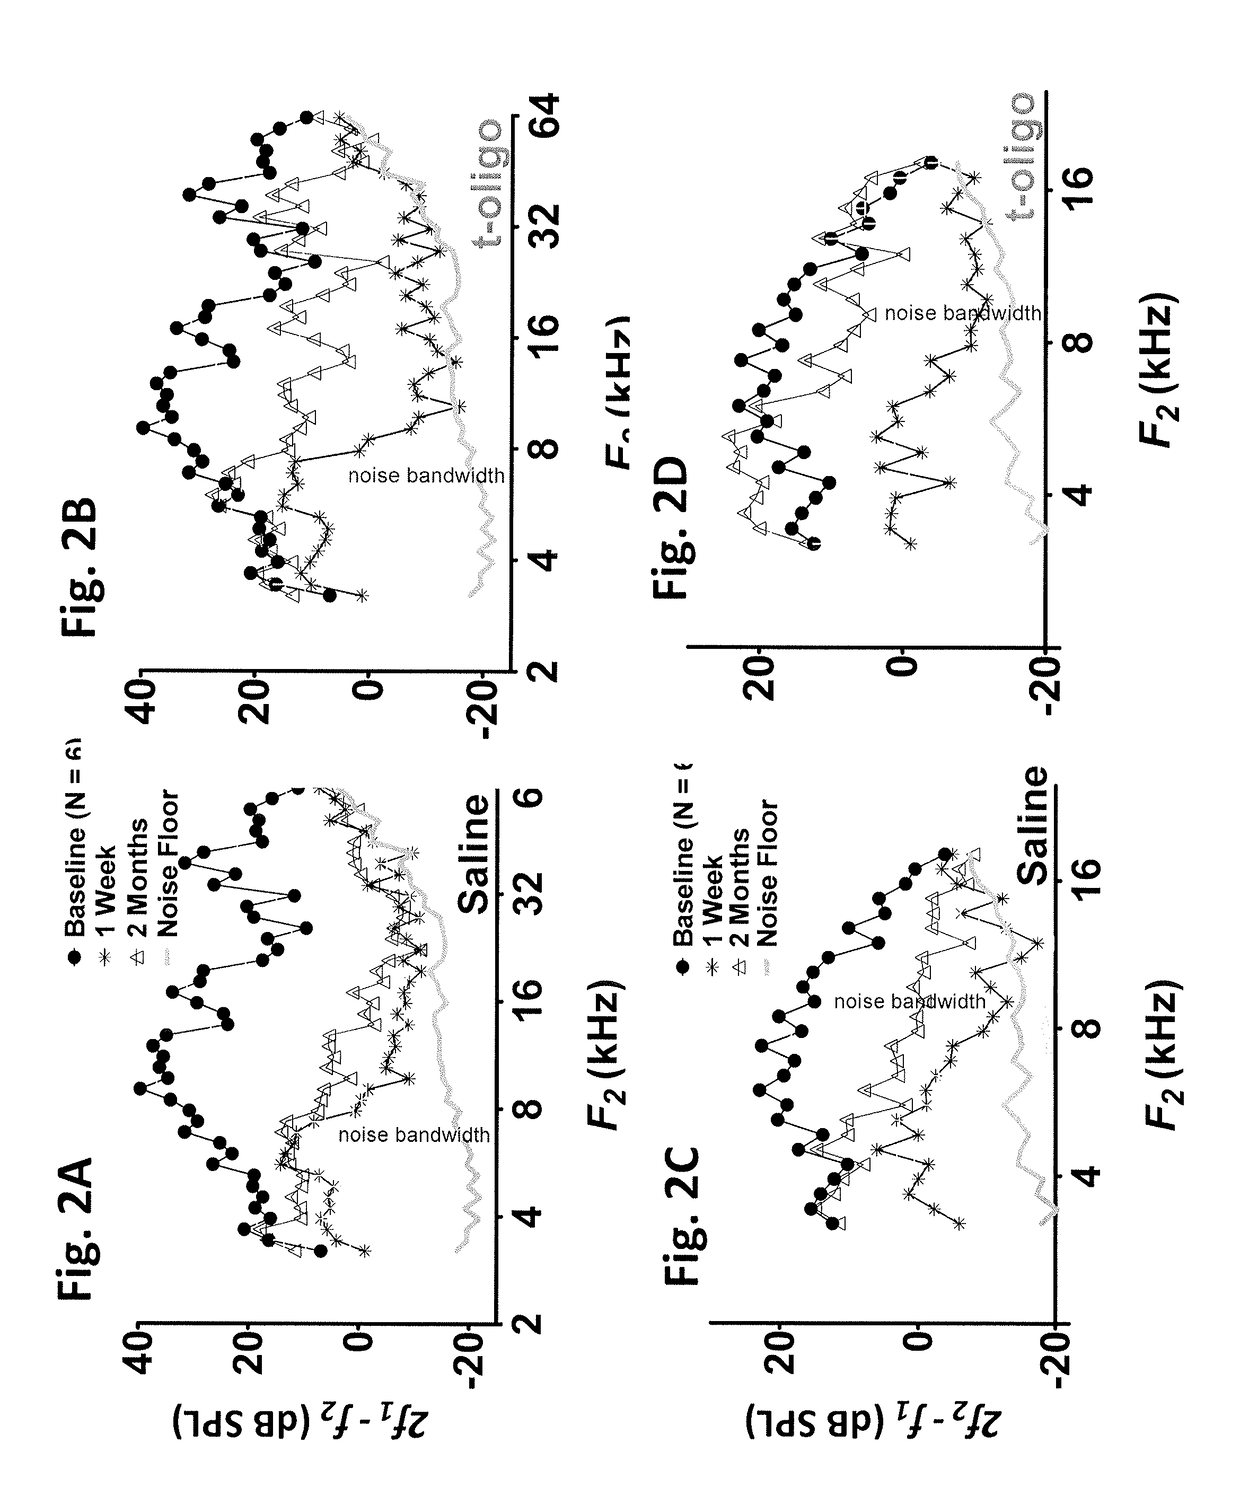 Methods of treating, inhibiting and/or preventing an auditory impairment